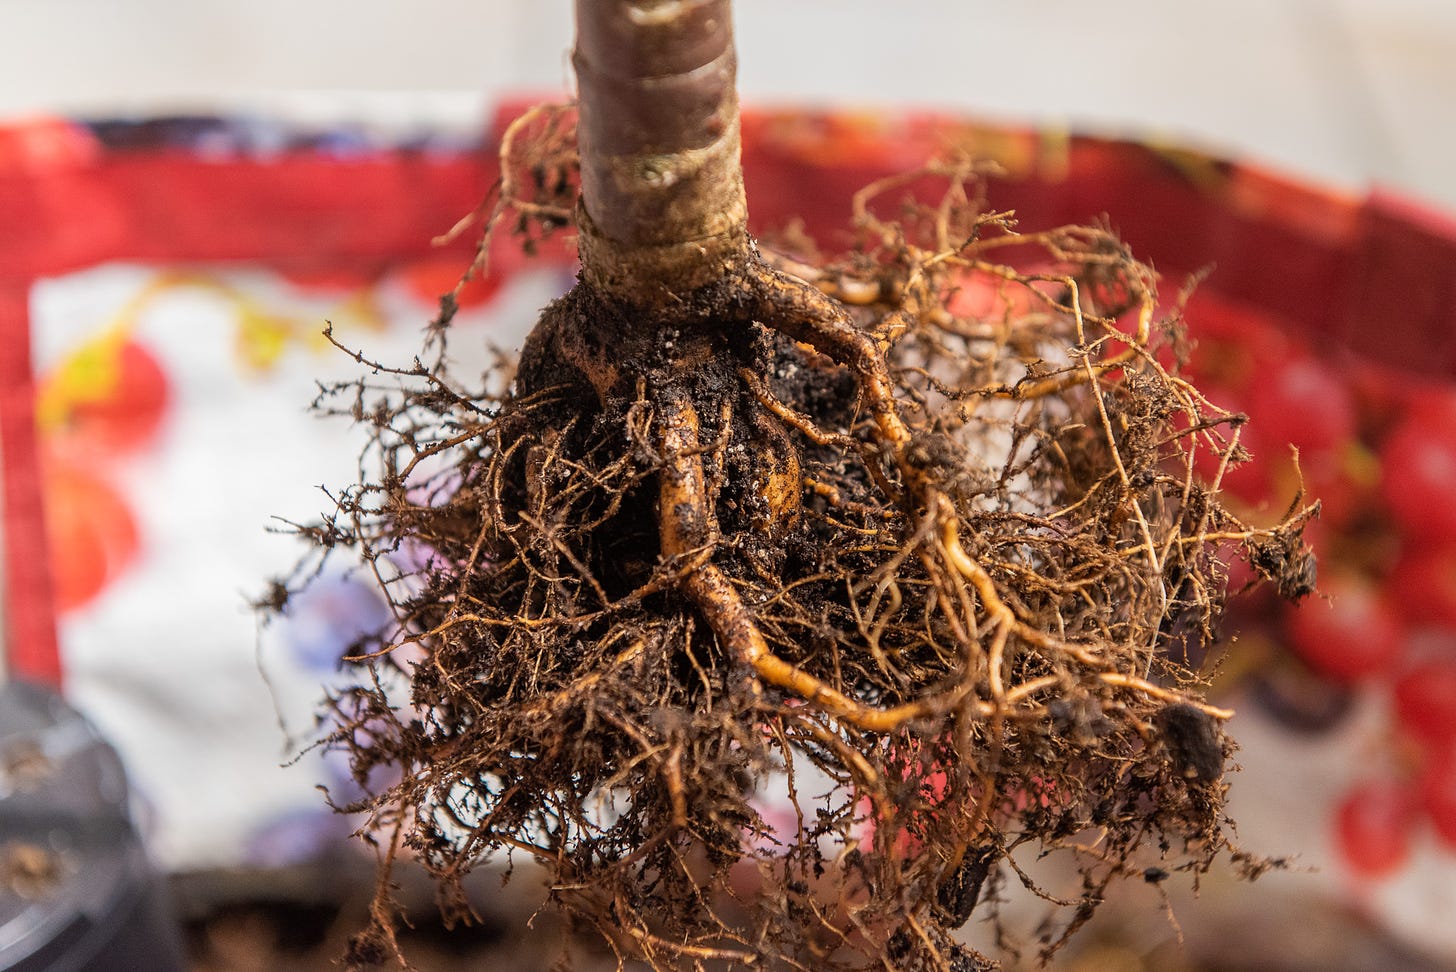 ID: The roots combed out, showing prominent roots of the nebari and a root above